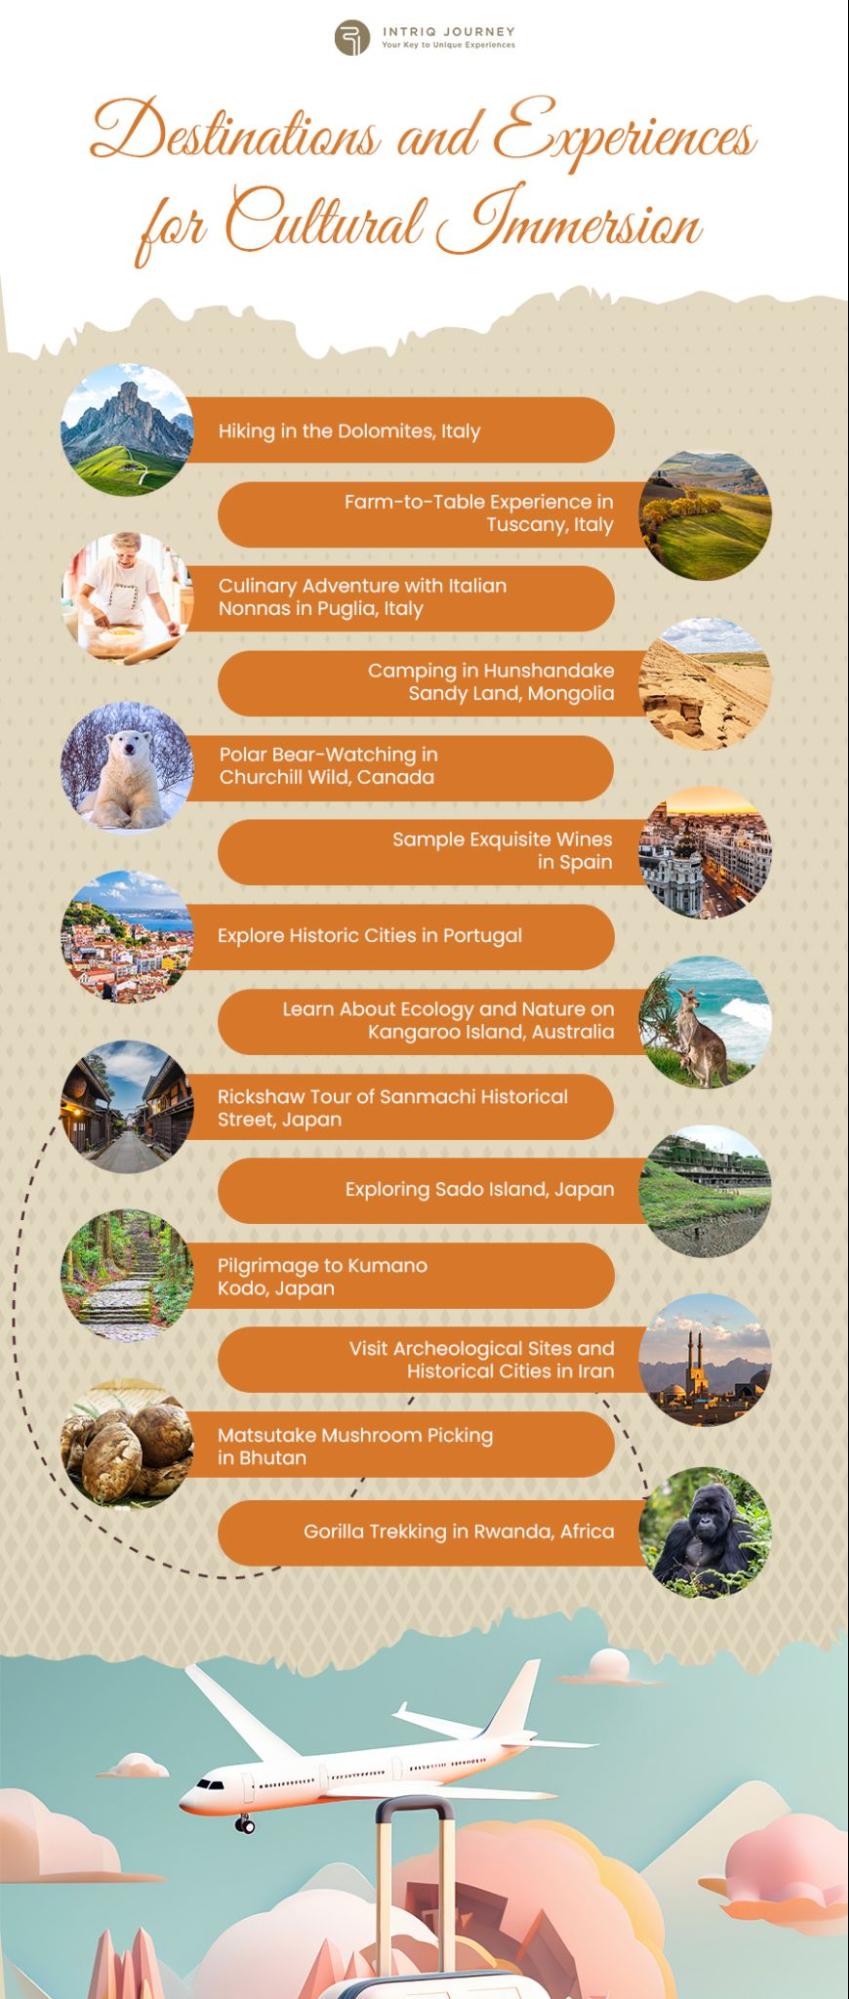 Destinations and Experiences for Cultural Immersion